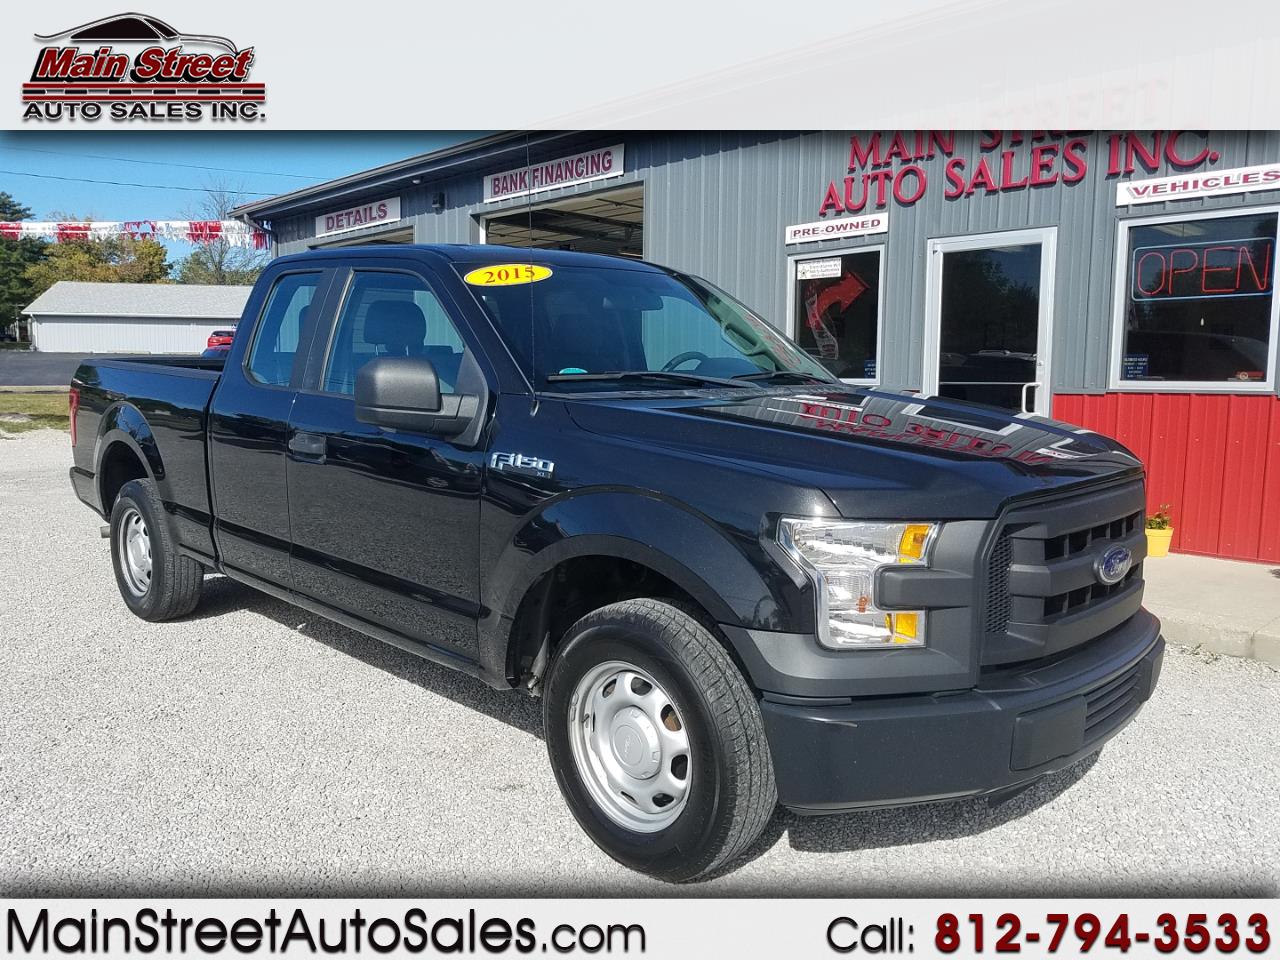 Used 2015 Ford F 150 Xl Supercab 6 5 Ft Bed 2wd For Sale In